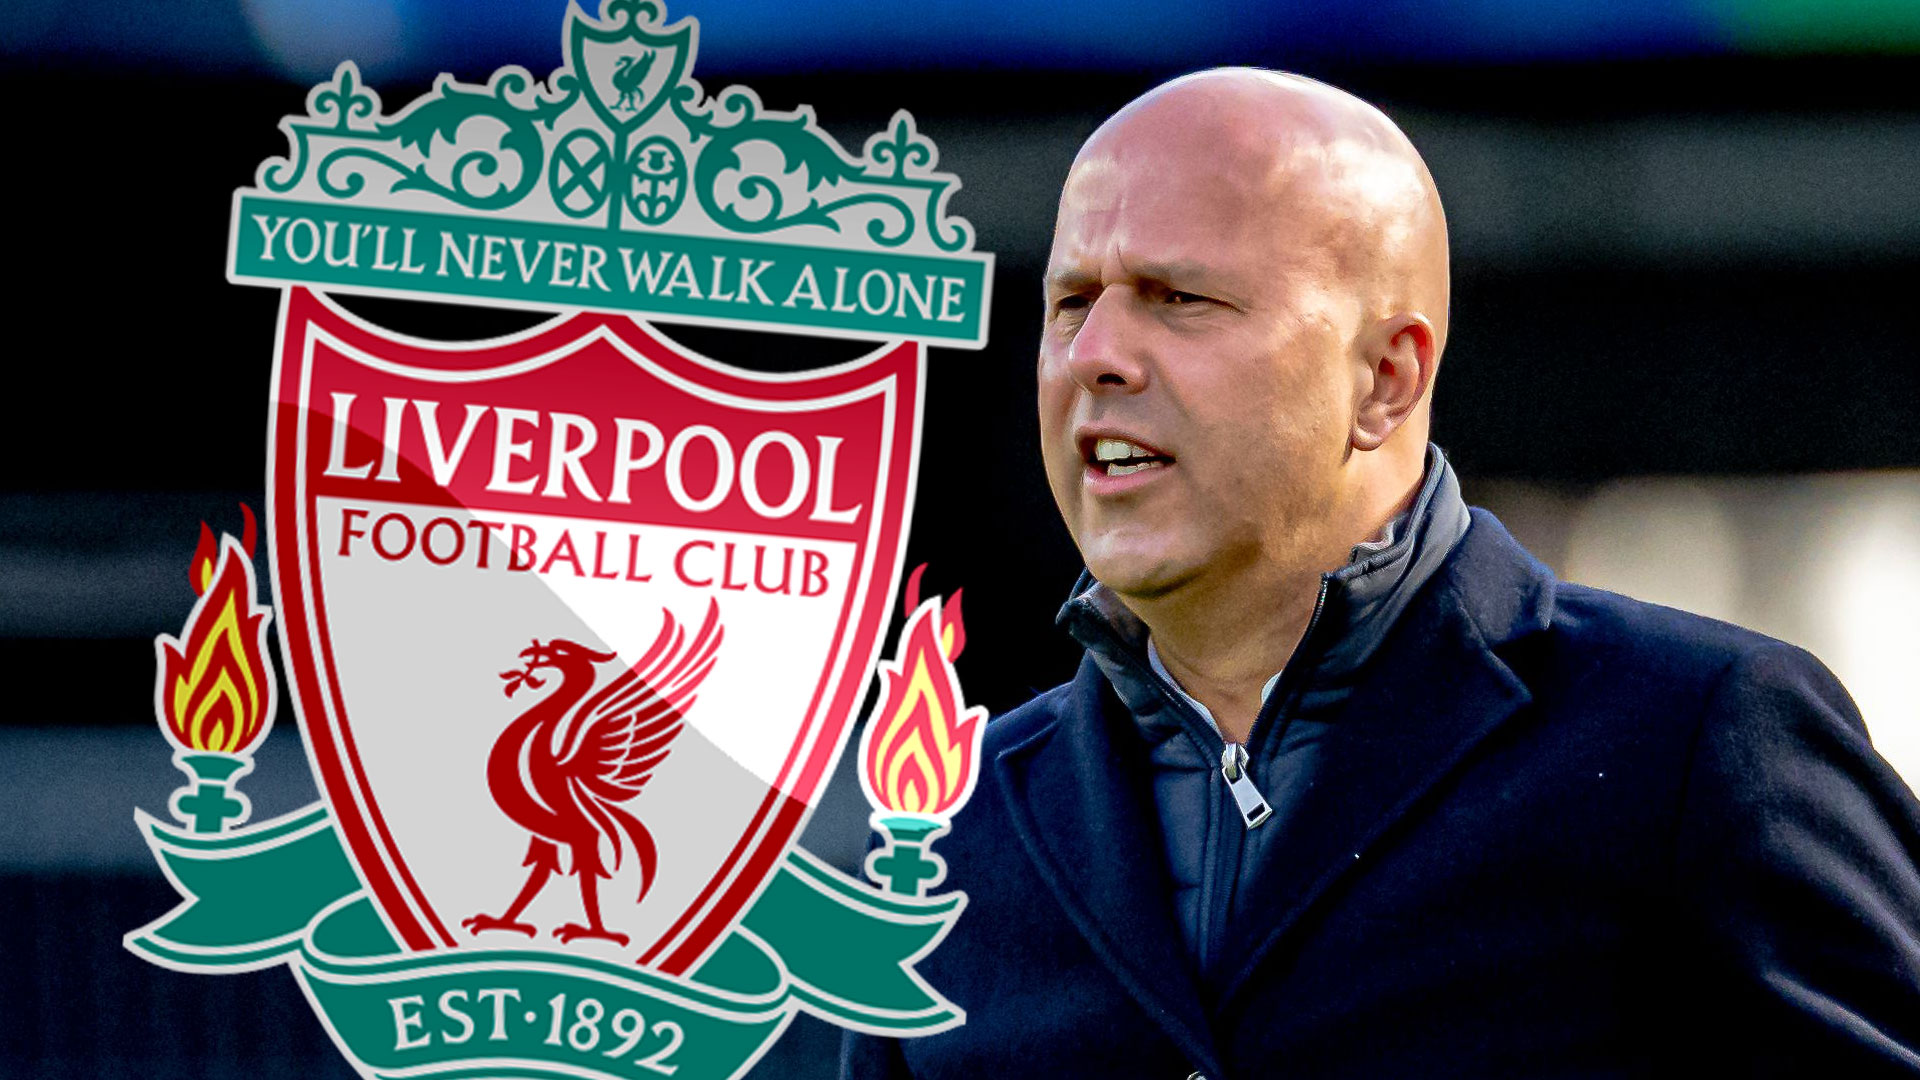 Arne Slot to become new Liverpool manager as £9.4m deal agreed with Feyenoord